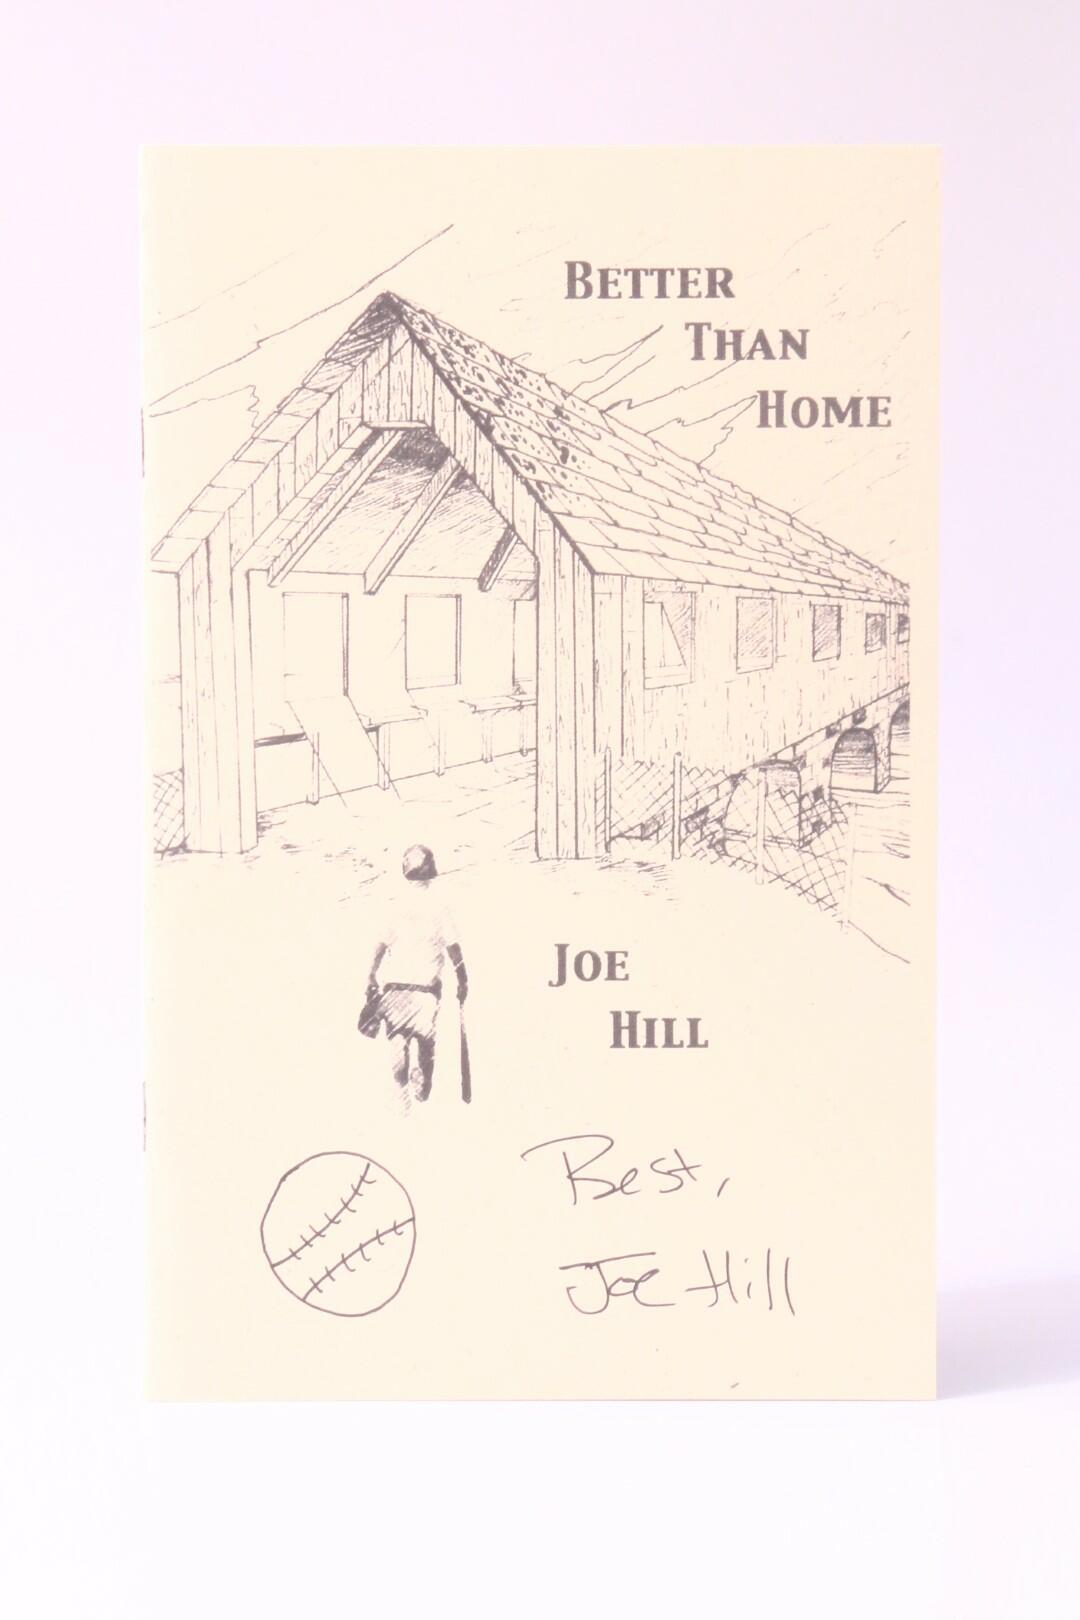 Joe Hill - Better Than Home - White Eagle Coffee Store Press, 1999, Signed First Edition.